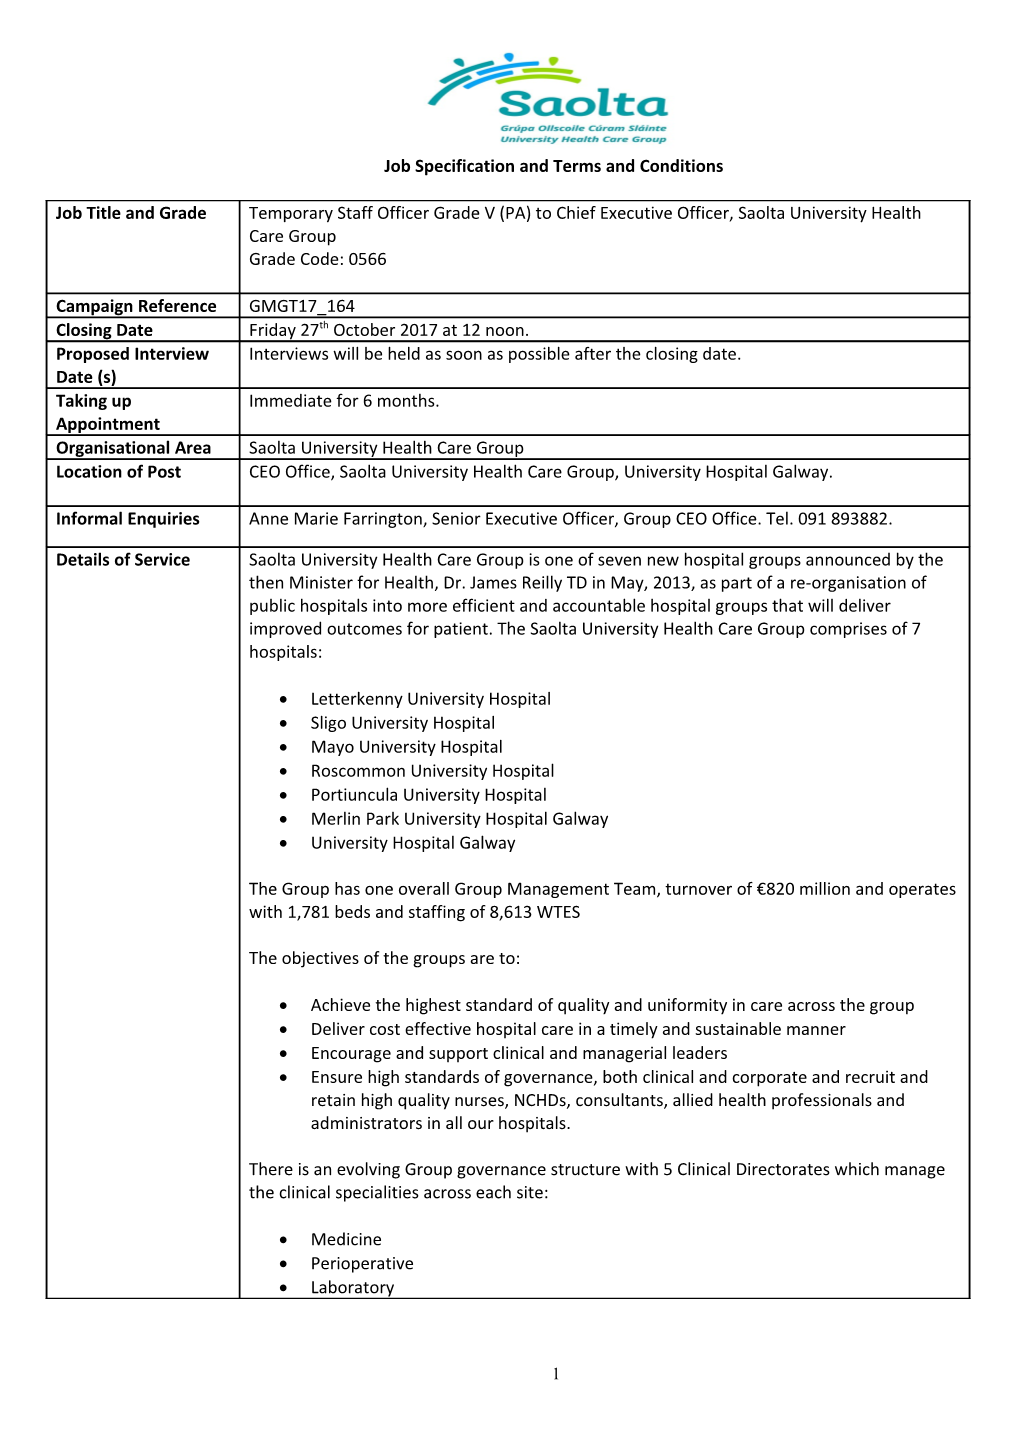 Job Specification and Terms and Conditions s1